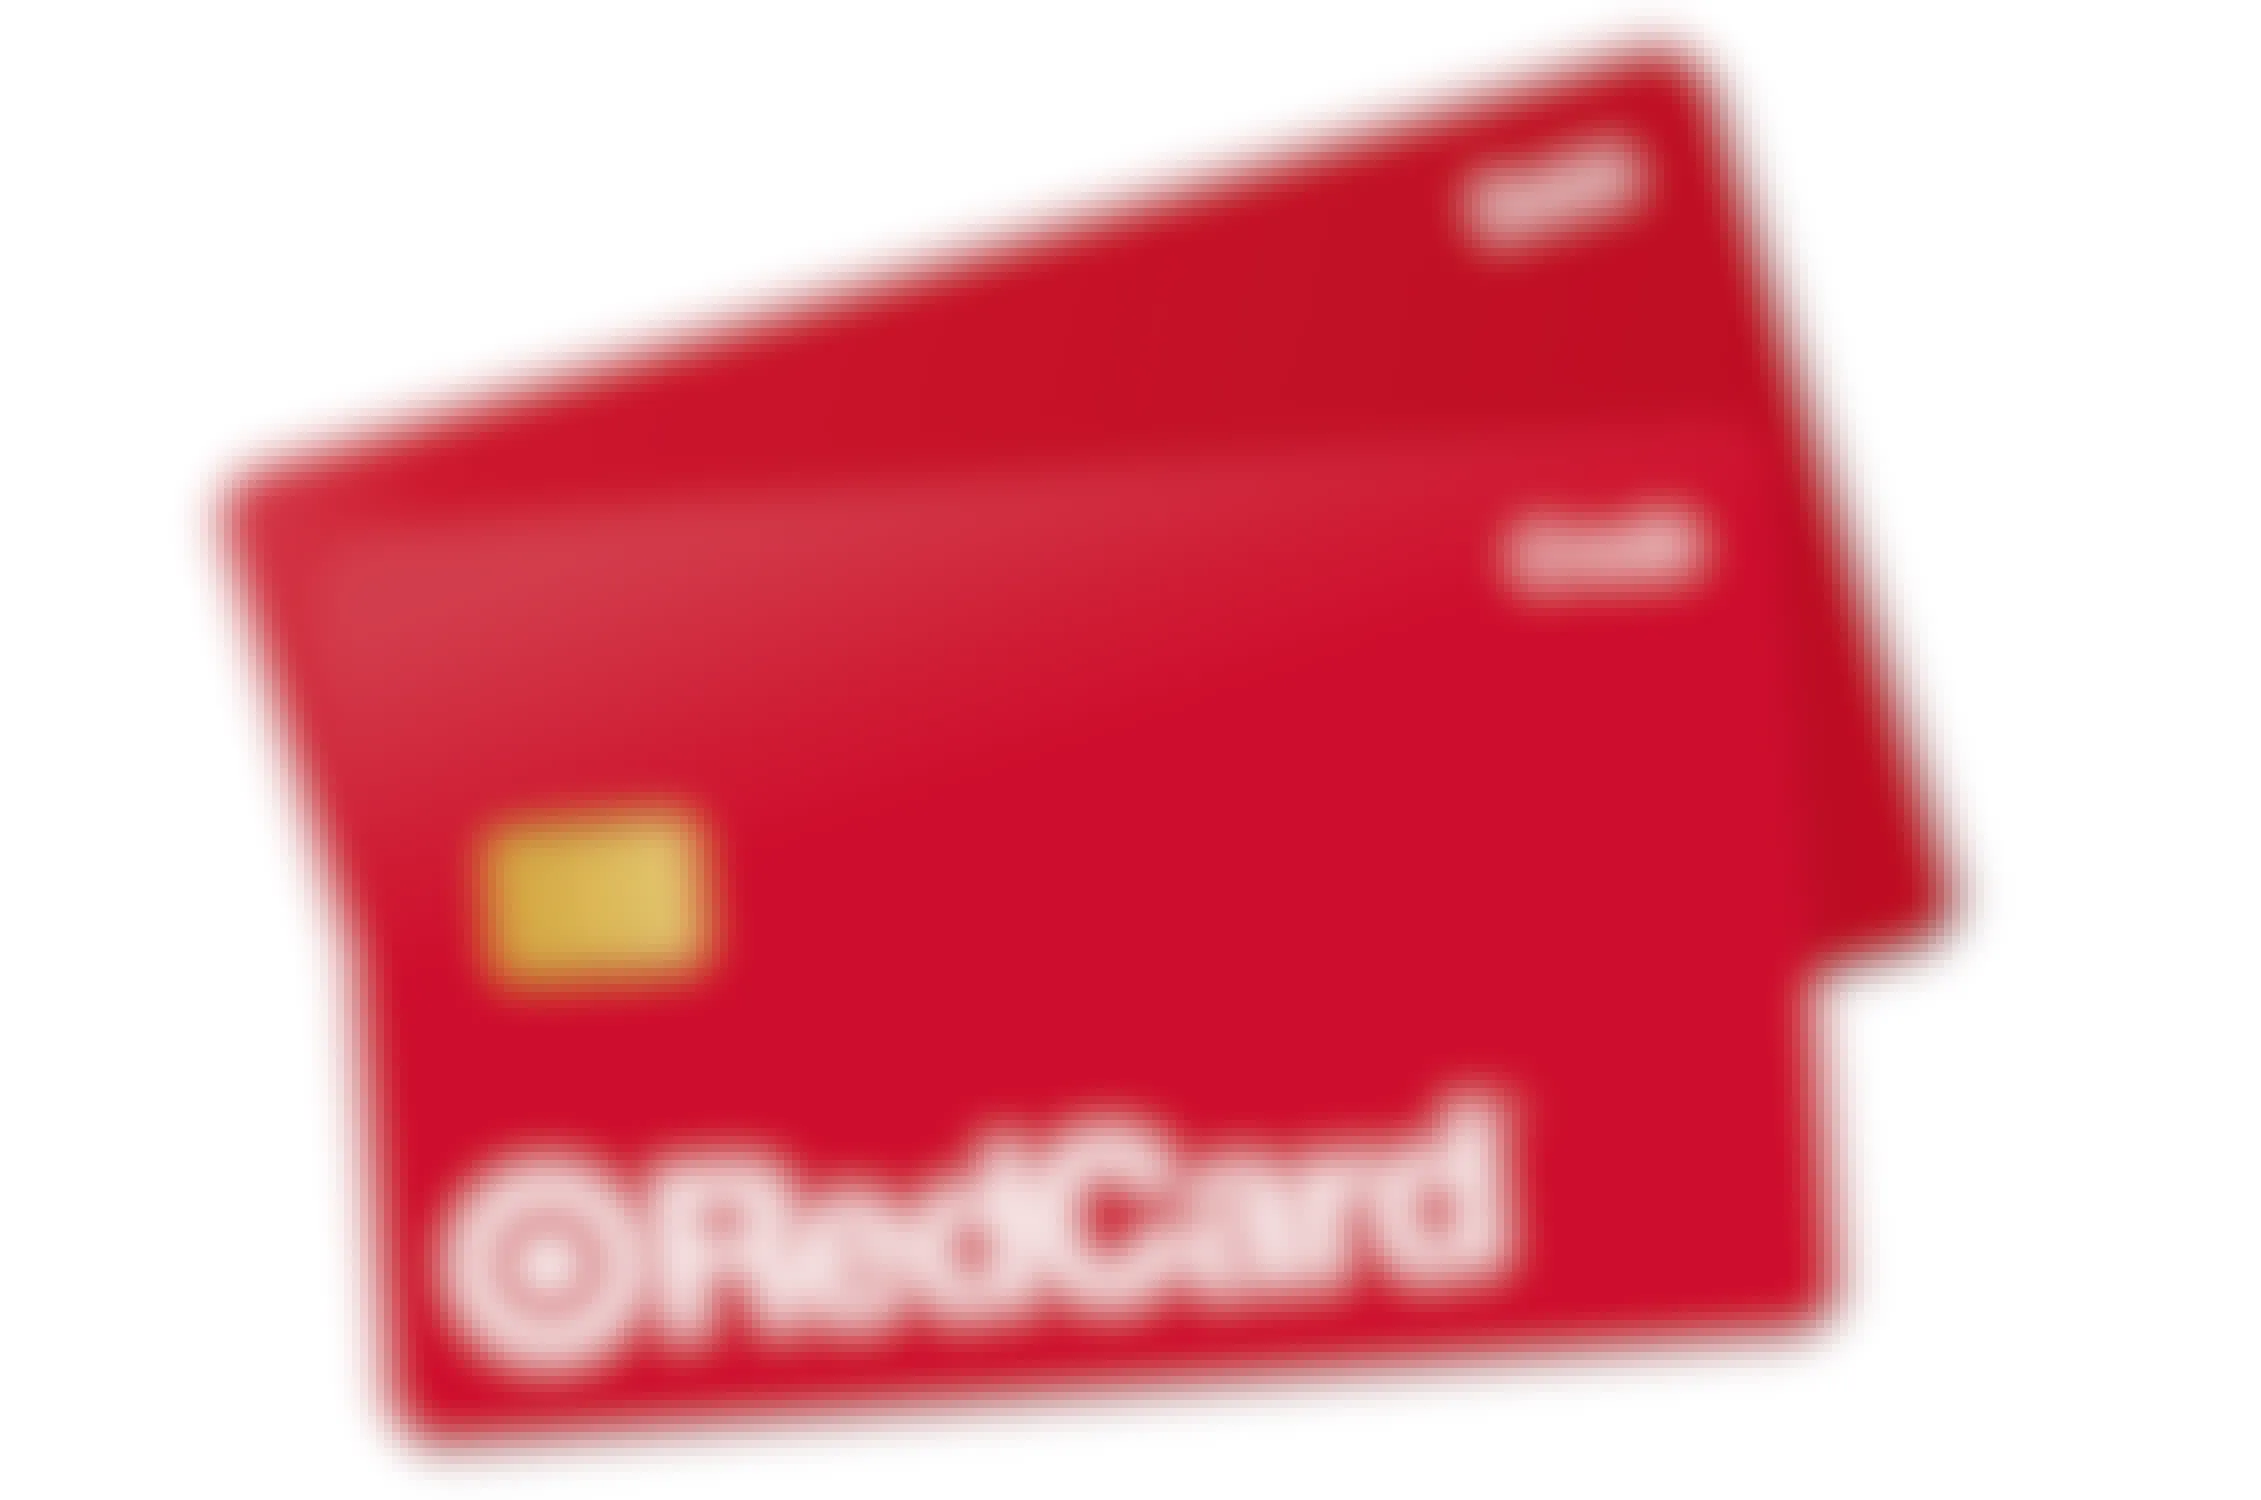 Target RedCard debit and credit cards